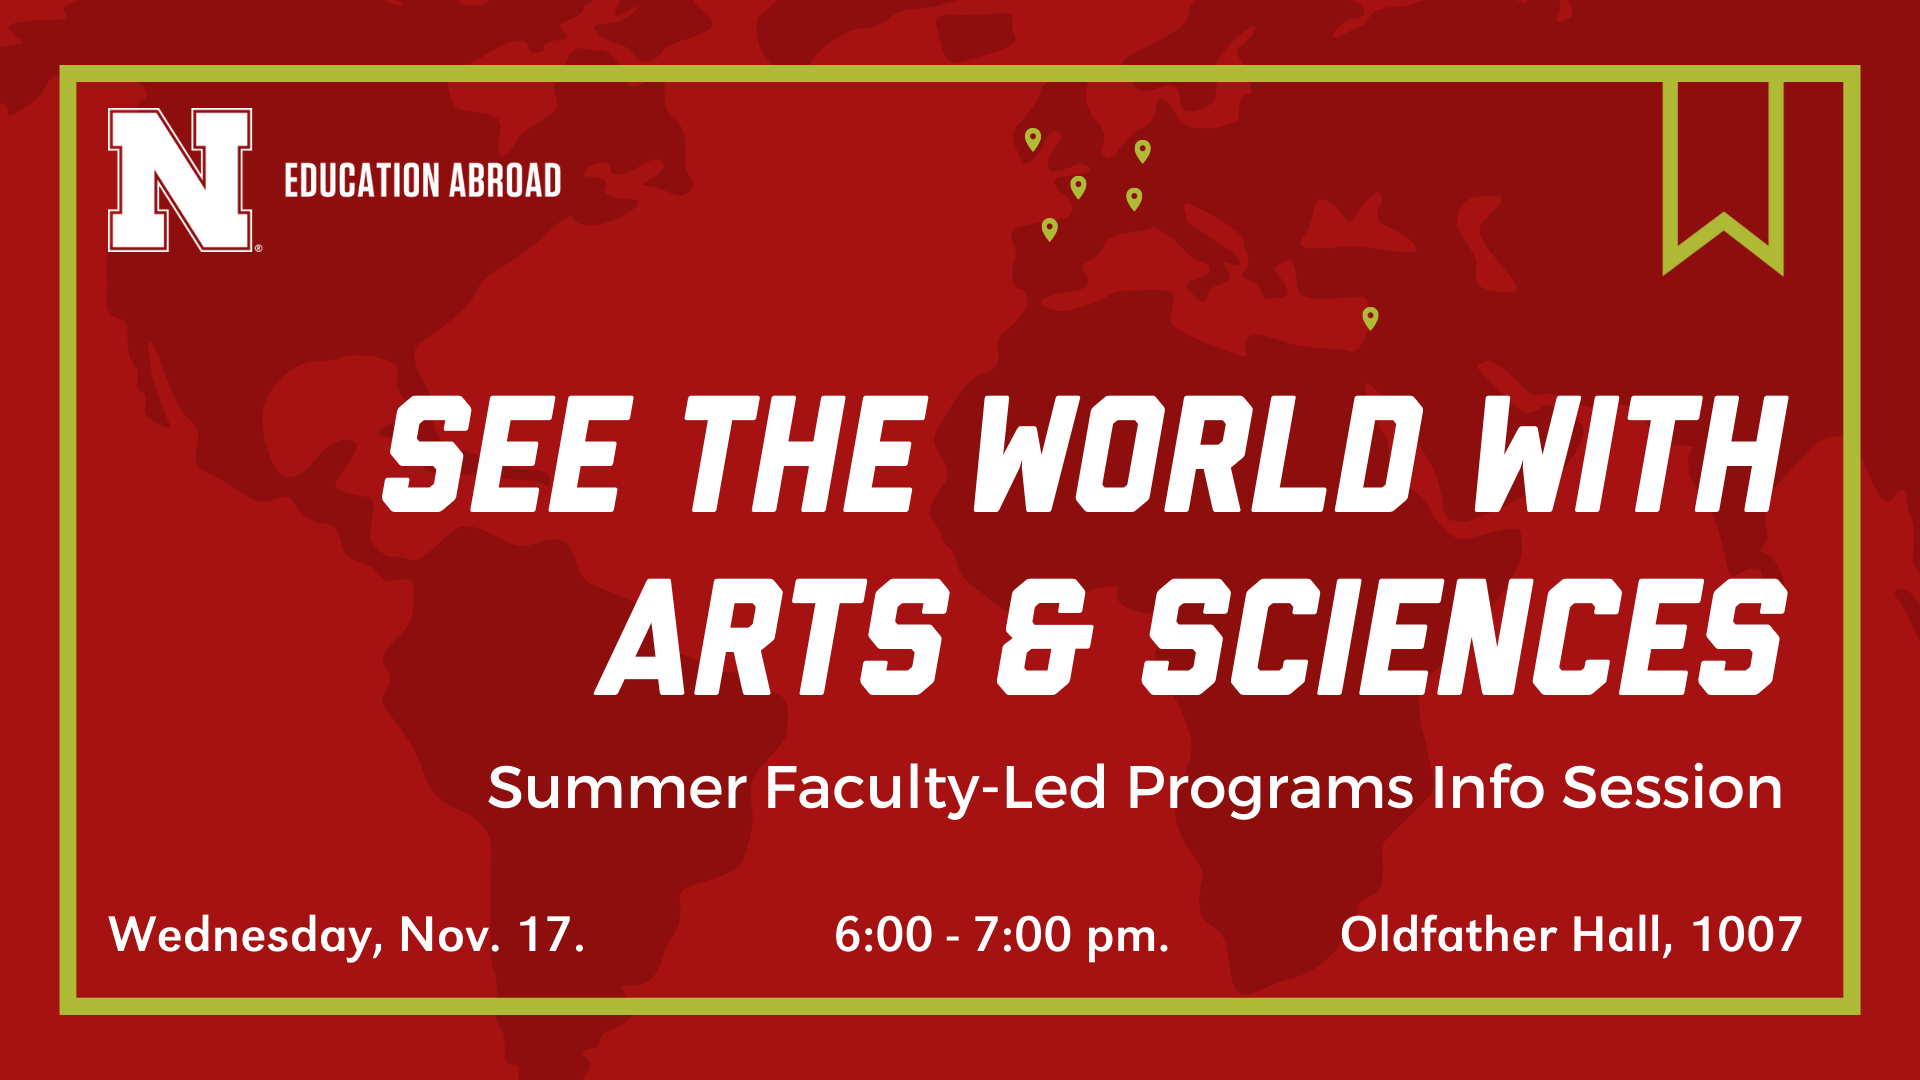 See the World With Arts & Sciences: Summer 2022 Faculty-Led Programs Info Session